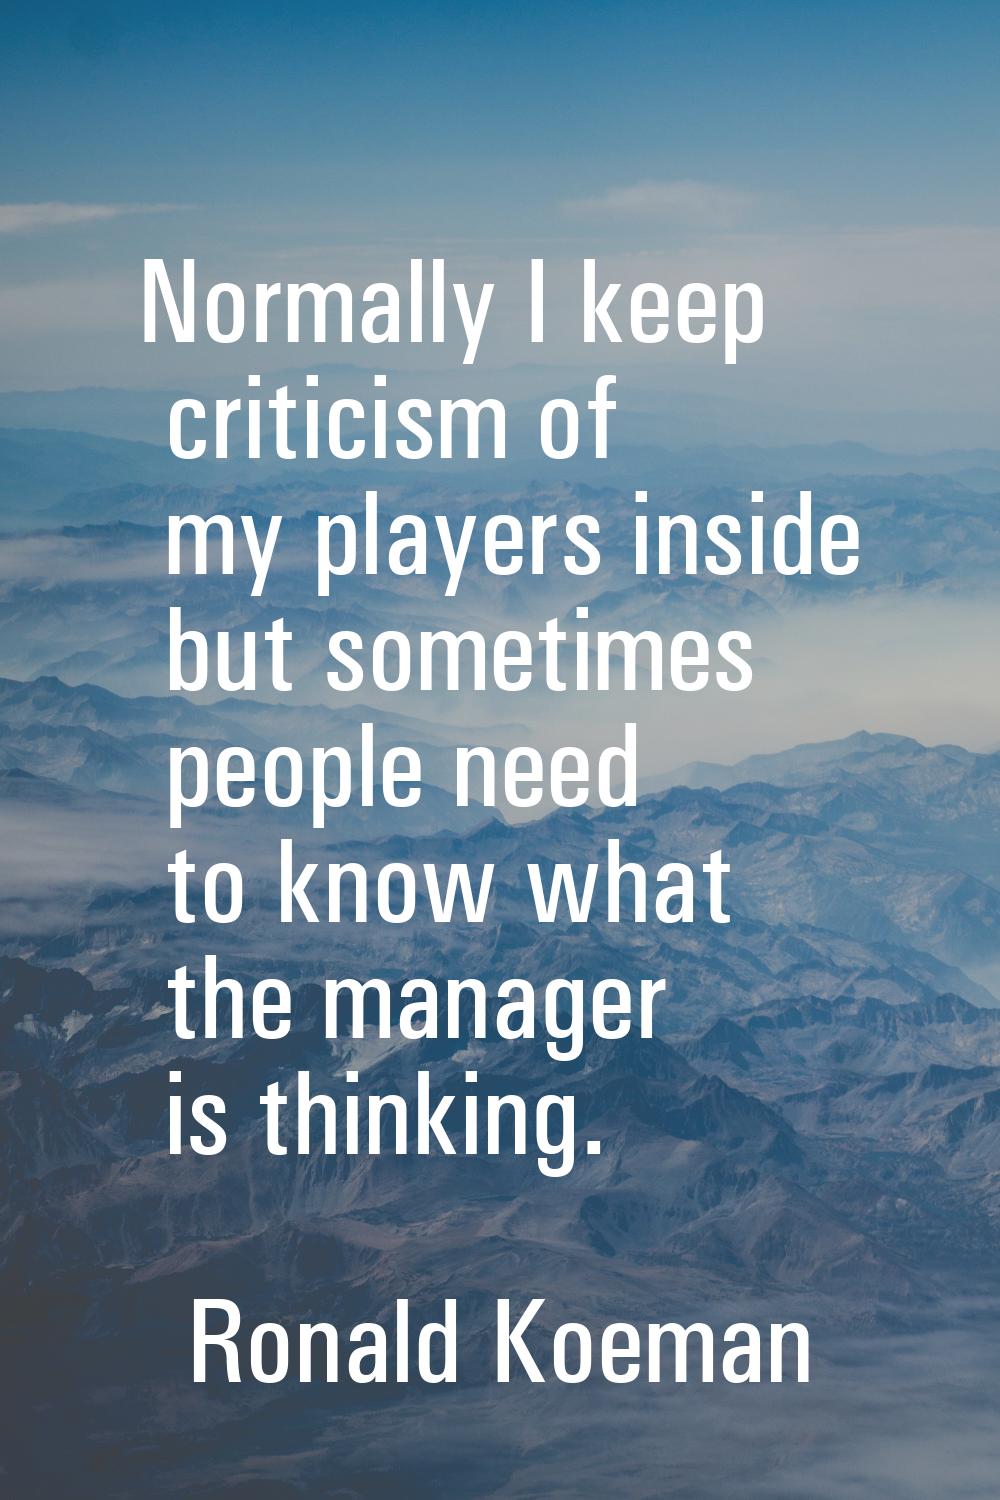 Normally I keep criticism of my players inside but sometimes people need to know what the manager i